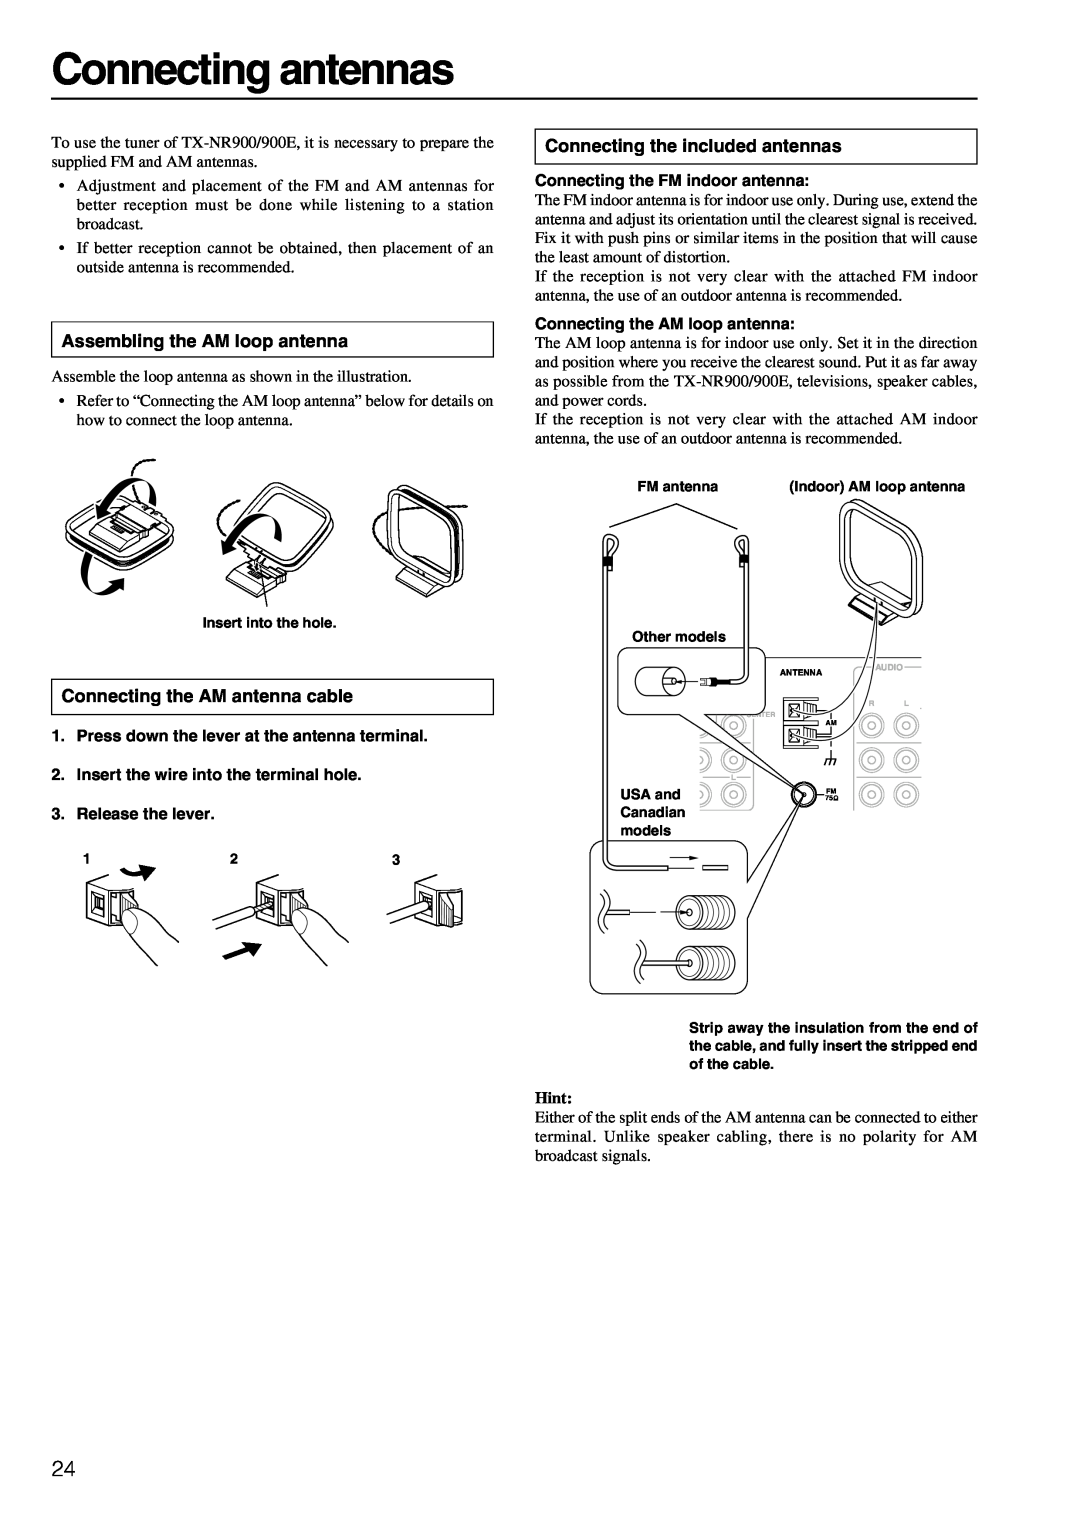 Onkyo TX-NR900E instruction manual Connecting antennas, Assembling the AM loop antenna, Connecting the AM antenna cable 